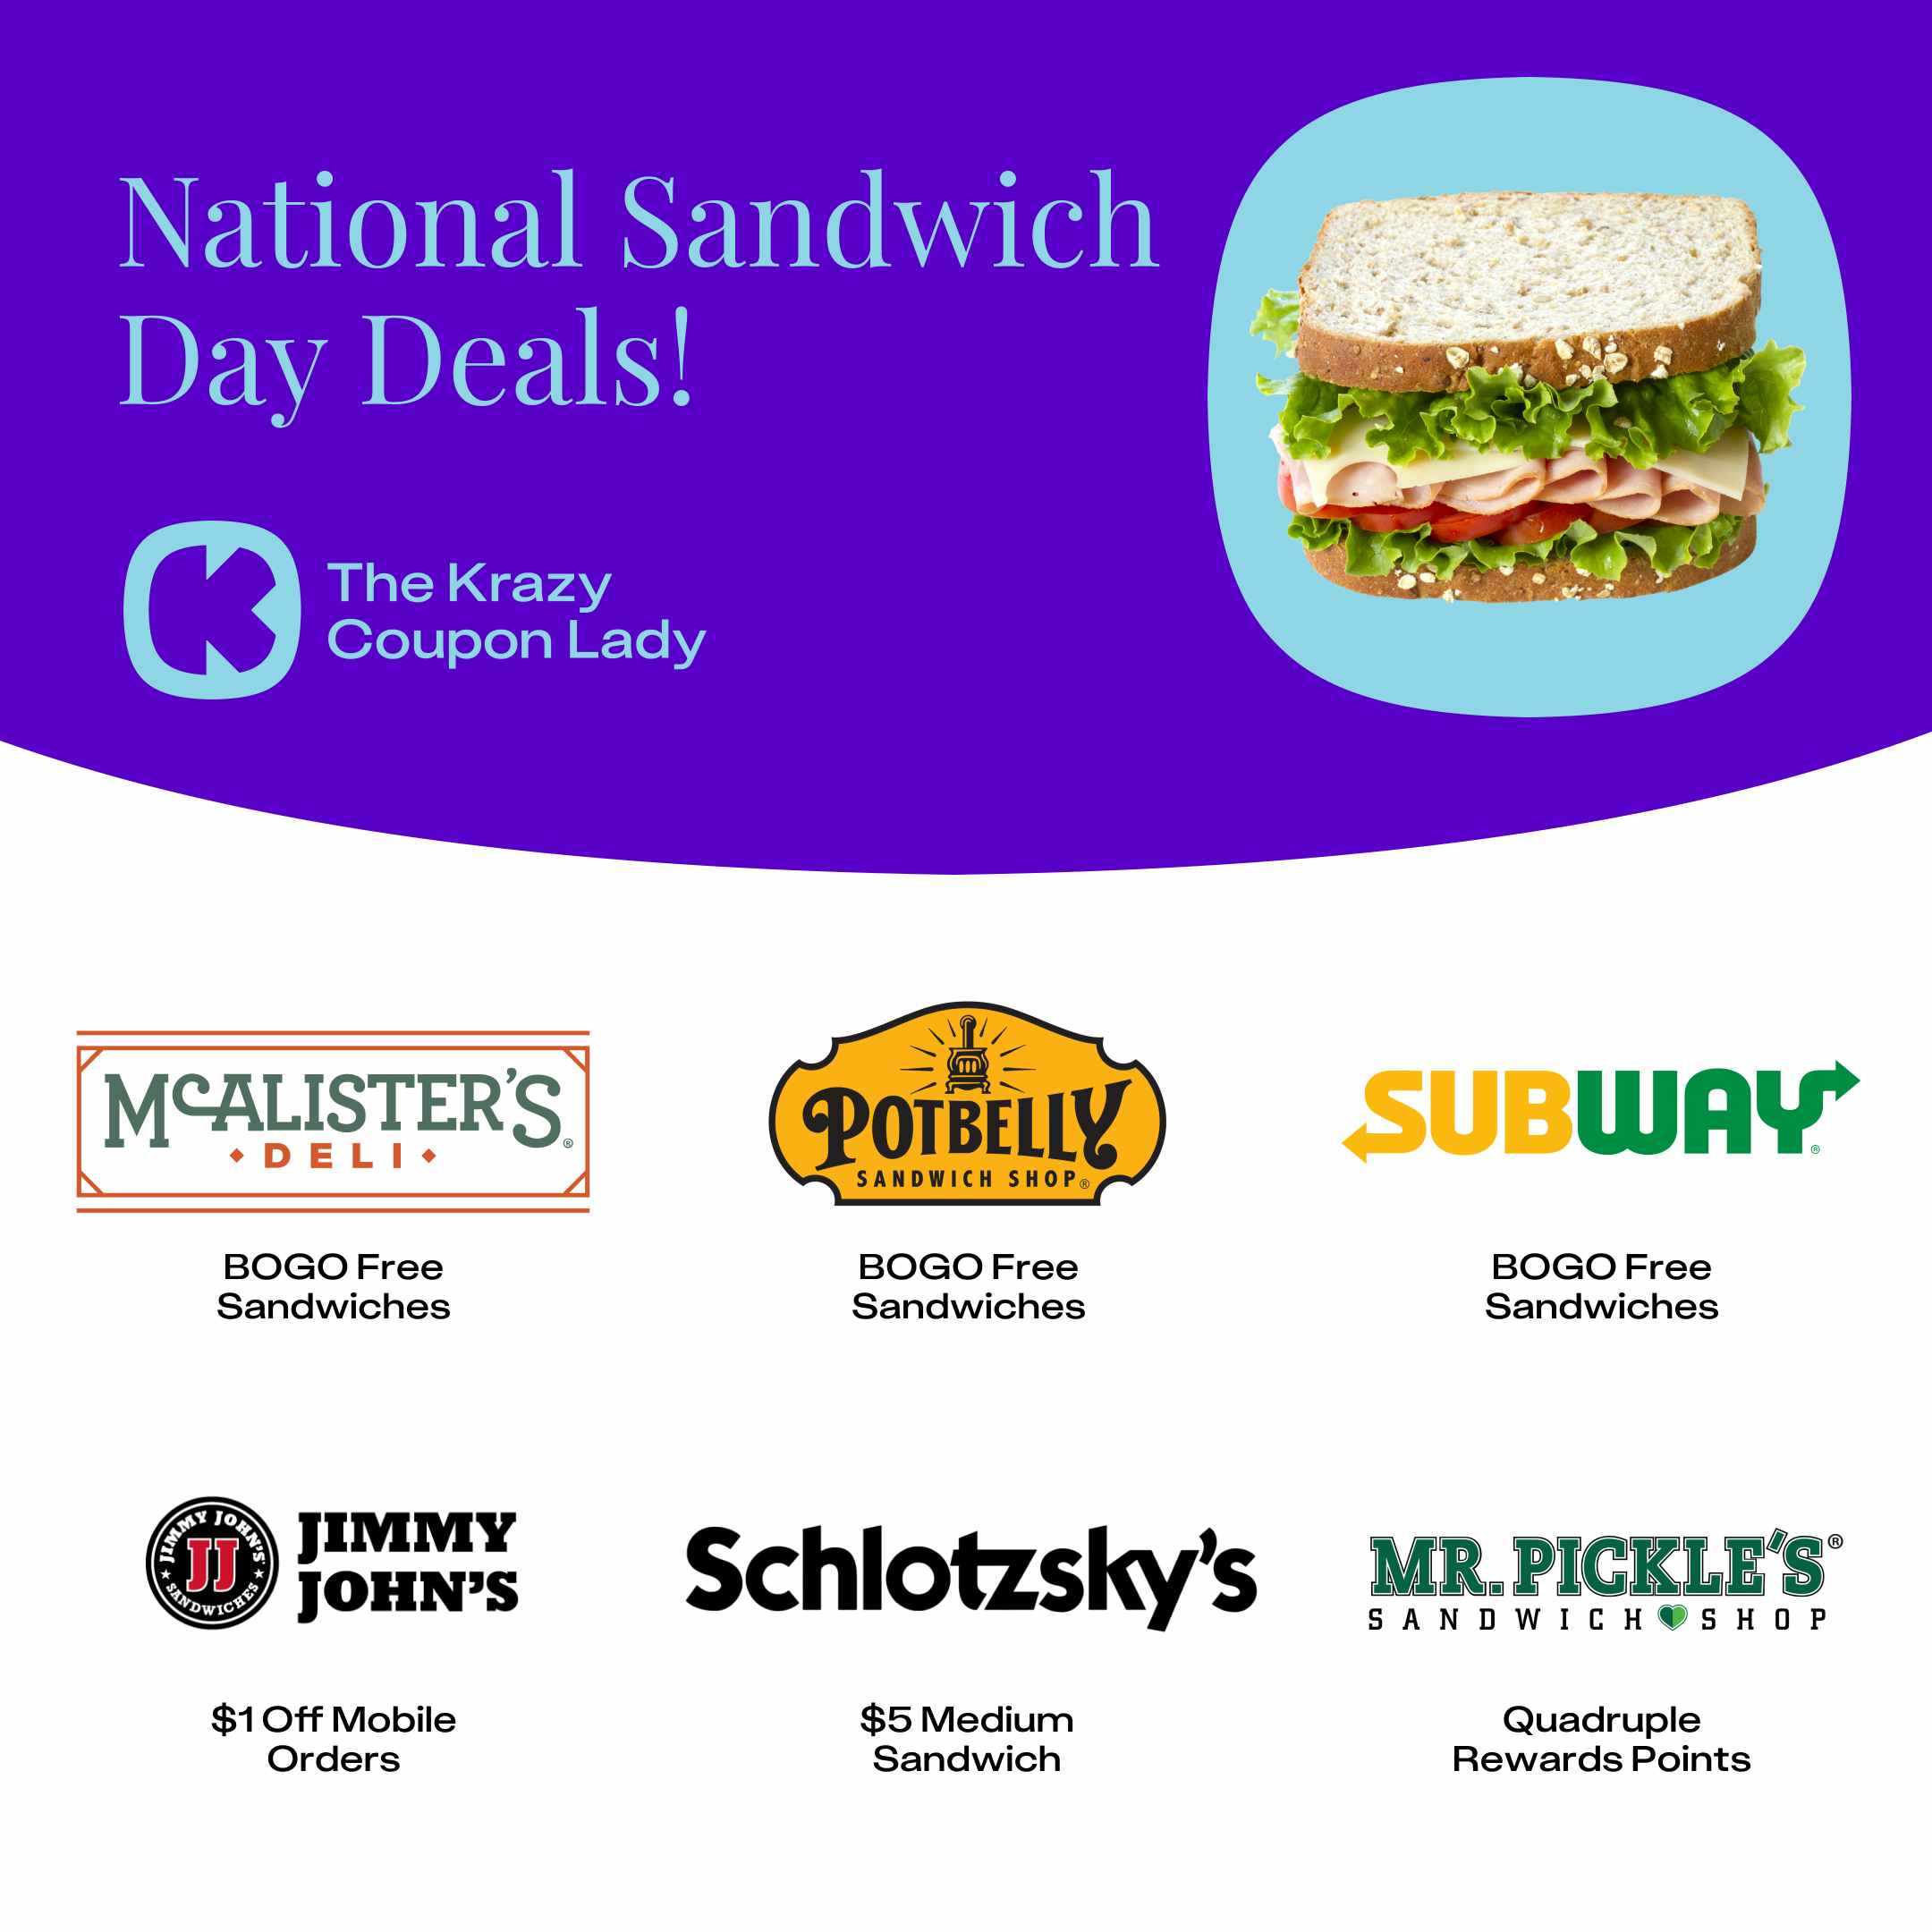 https://prod-cdn-thekrazycouponlady.imgix.net/wp-content/uploads/2020/11/national-sandwich-day-deals-2023-1698947691-1698947692.png?auto=format&fit=fill&q=25